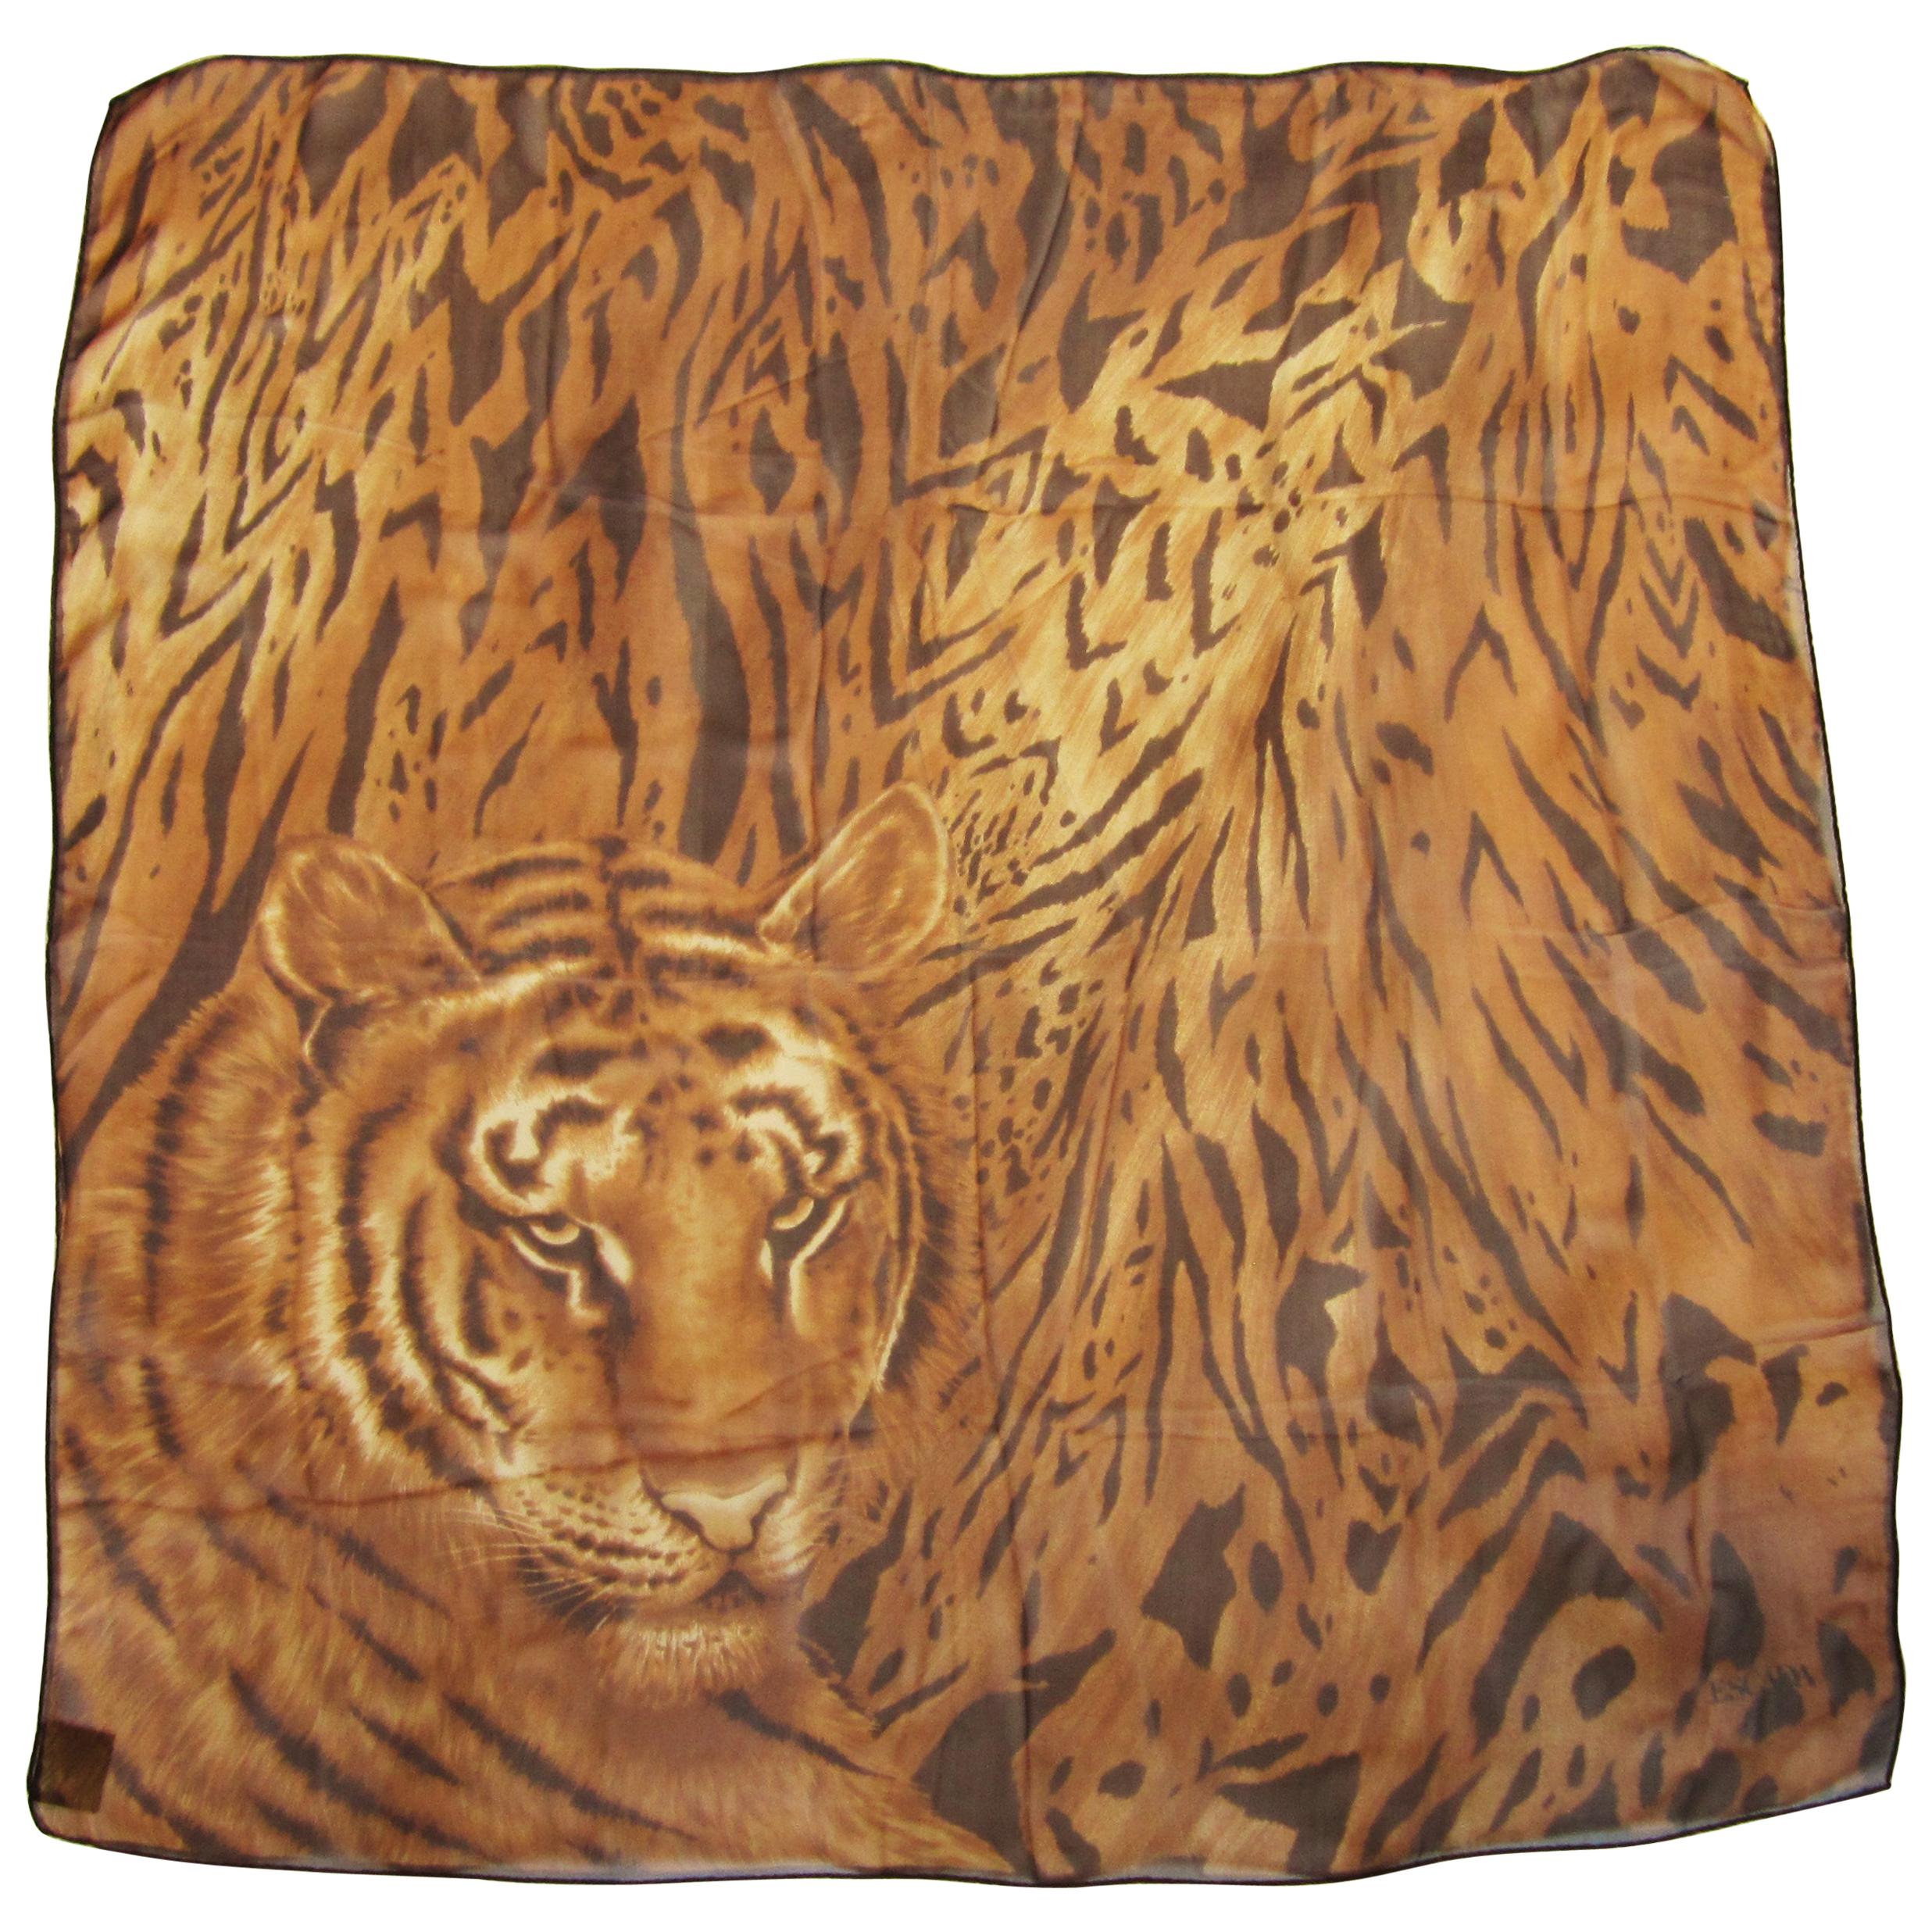  Escada Silk Scarf Tiger Face Made in Italy  New, Never Worn with Tag  For Sale